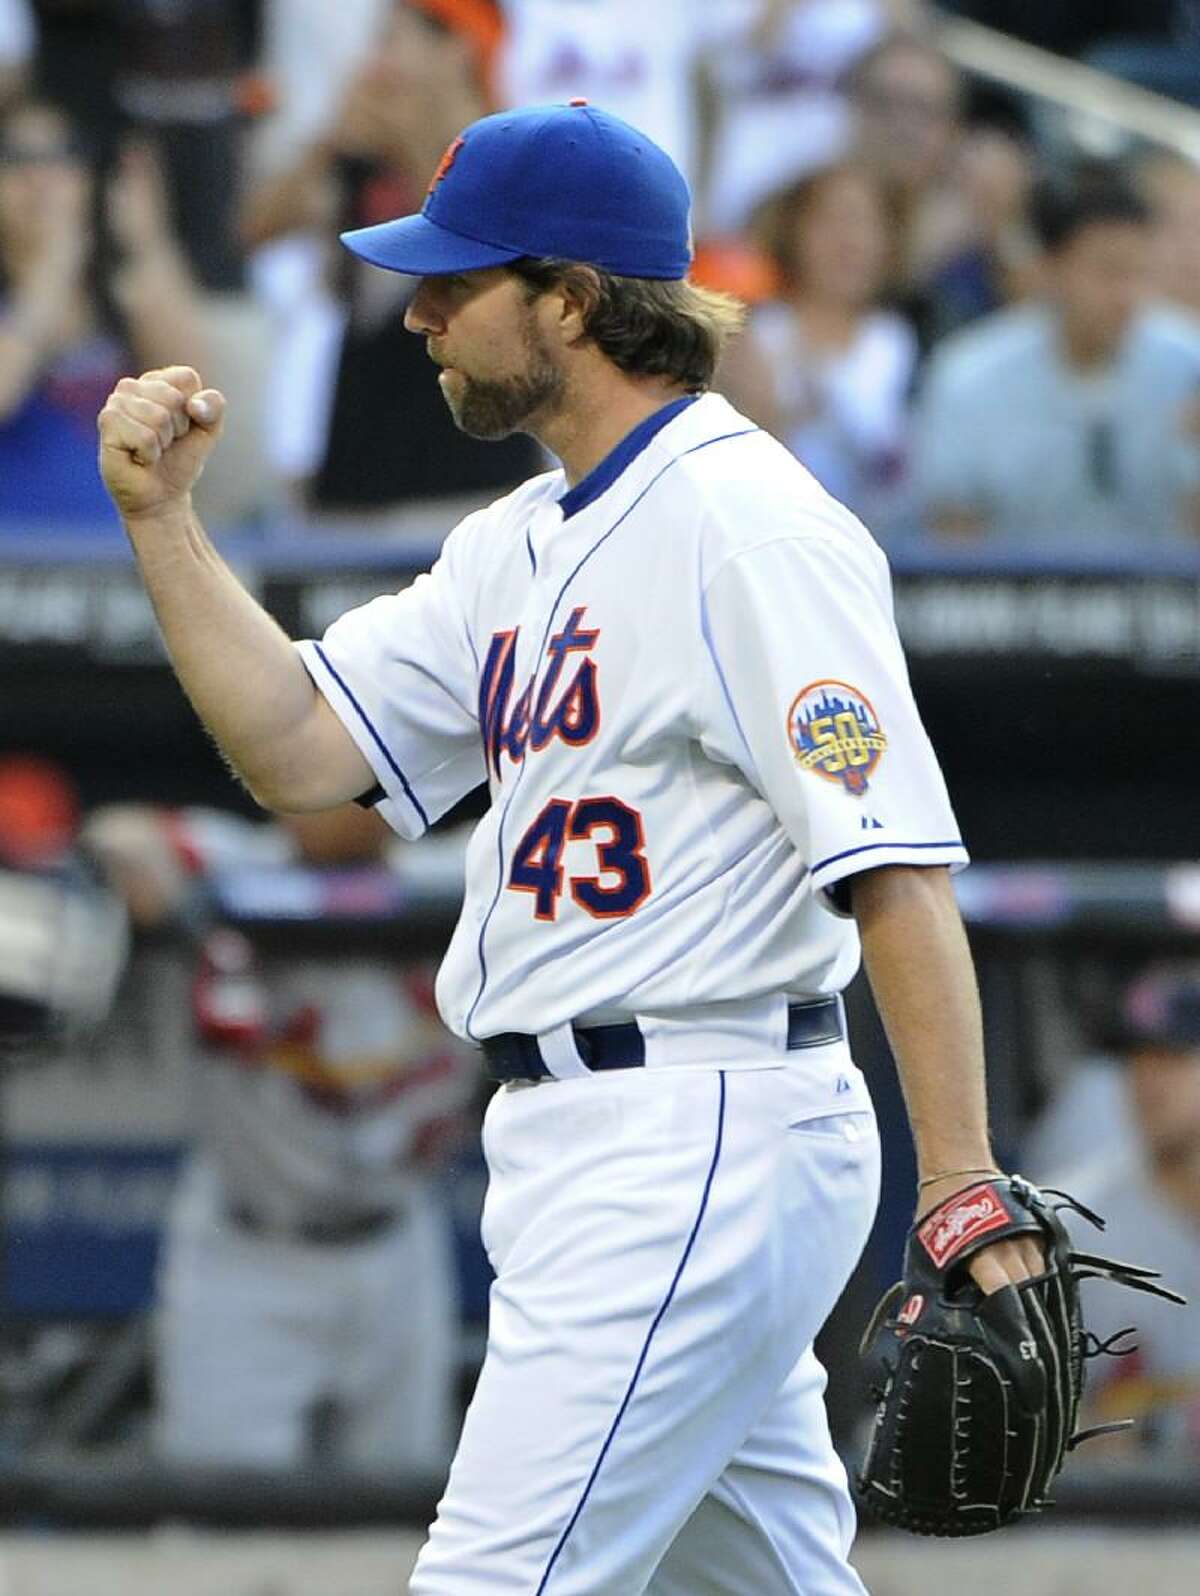 ASSOCIATED PRESS New York Mets starting pitcher R.A. Dickey pumps his fist after the Mets shut out the St. Louis Cardinals 5-0 Saturday at Citi Field in New York.